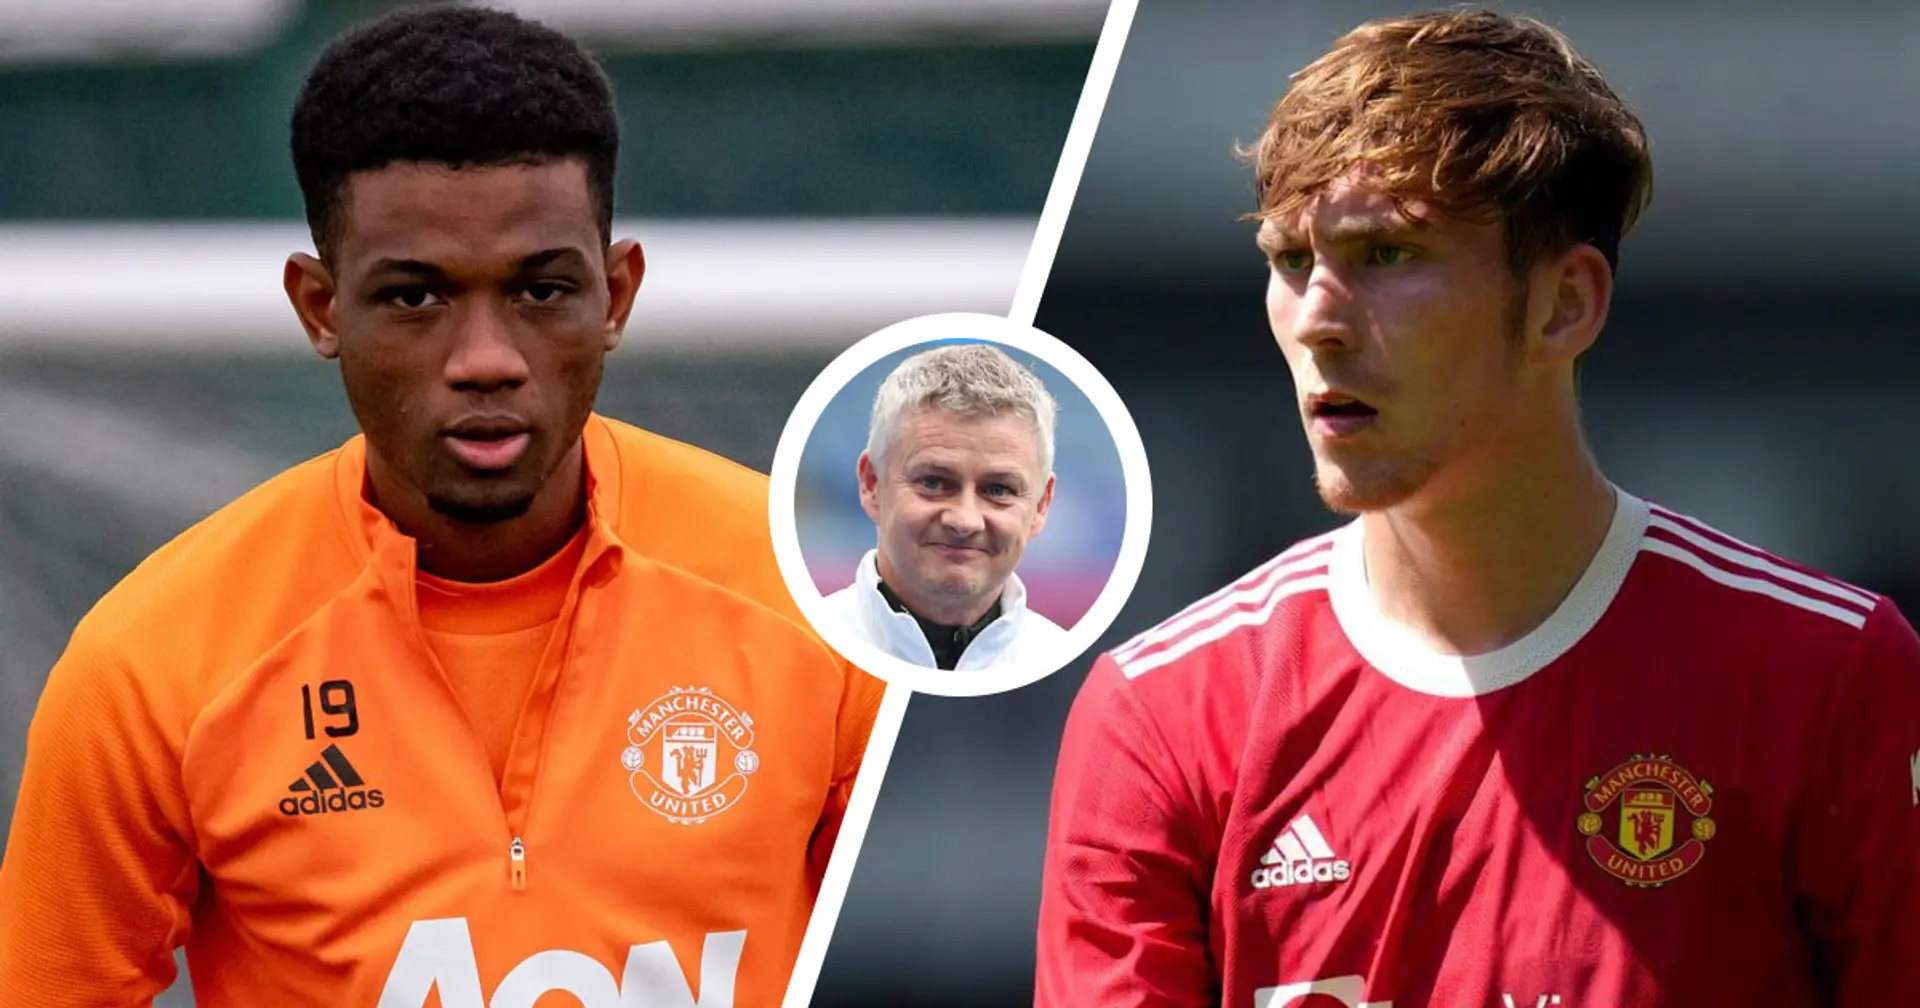 'It has to be the right move': Solskjaer confirms planned loan moves for Amad and Garner